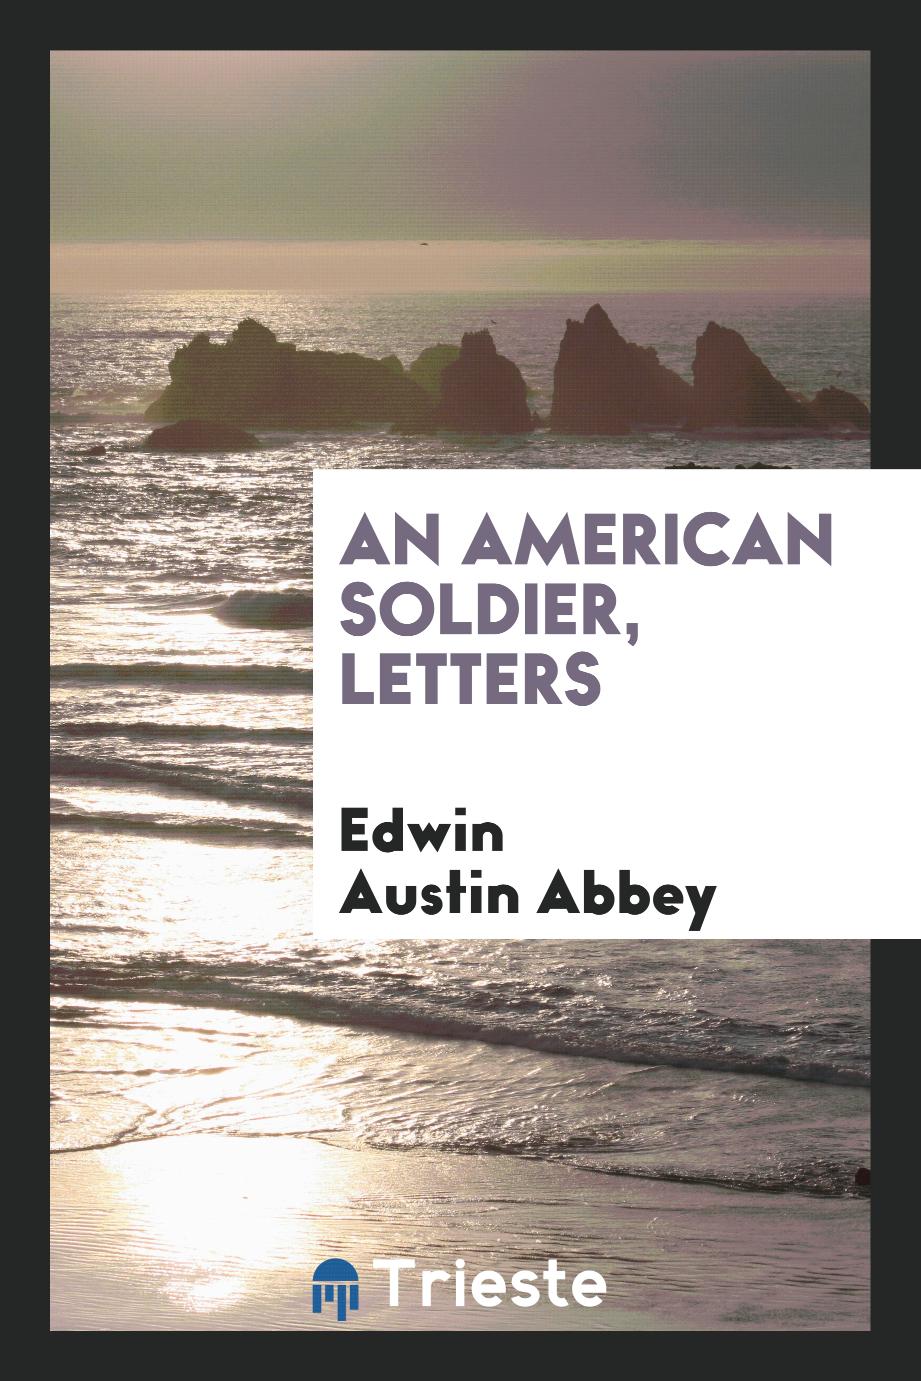 An American soldier, letters